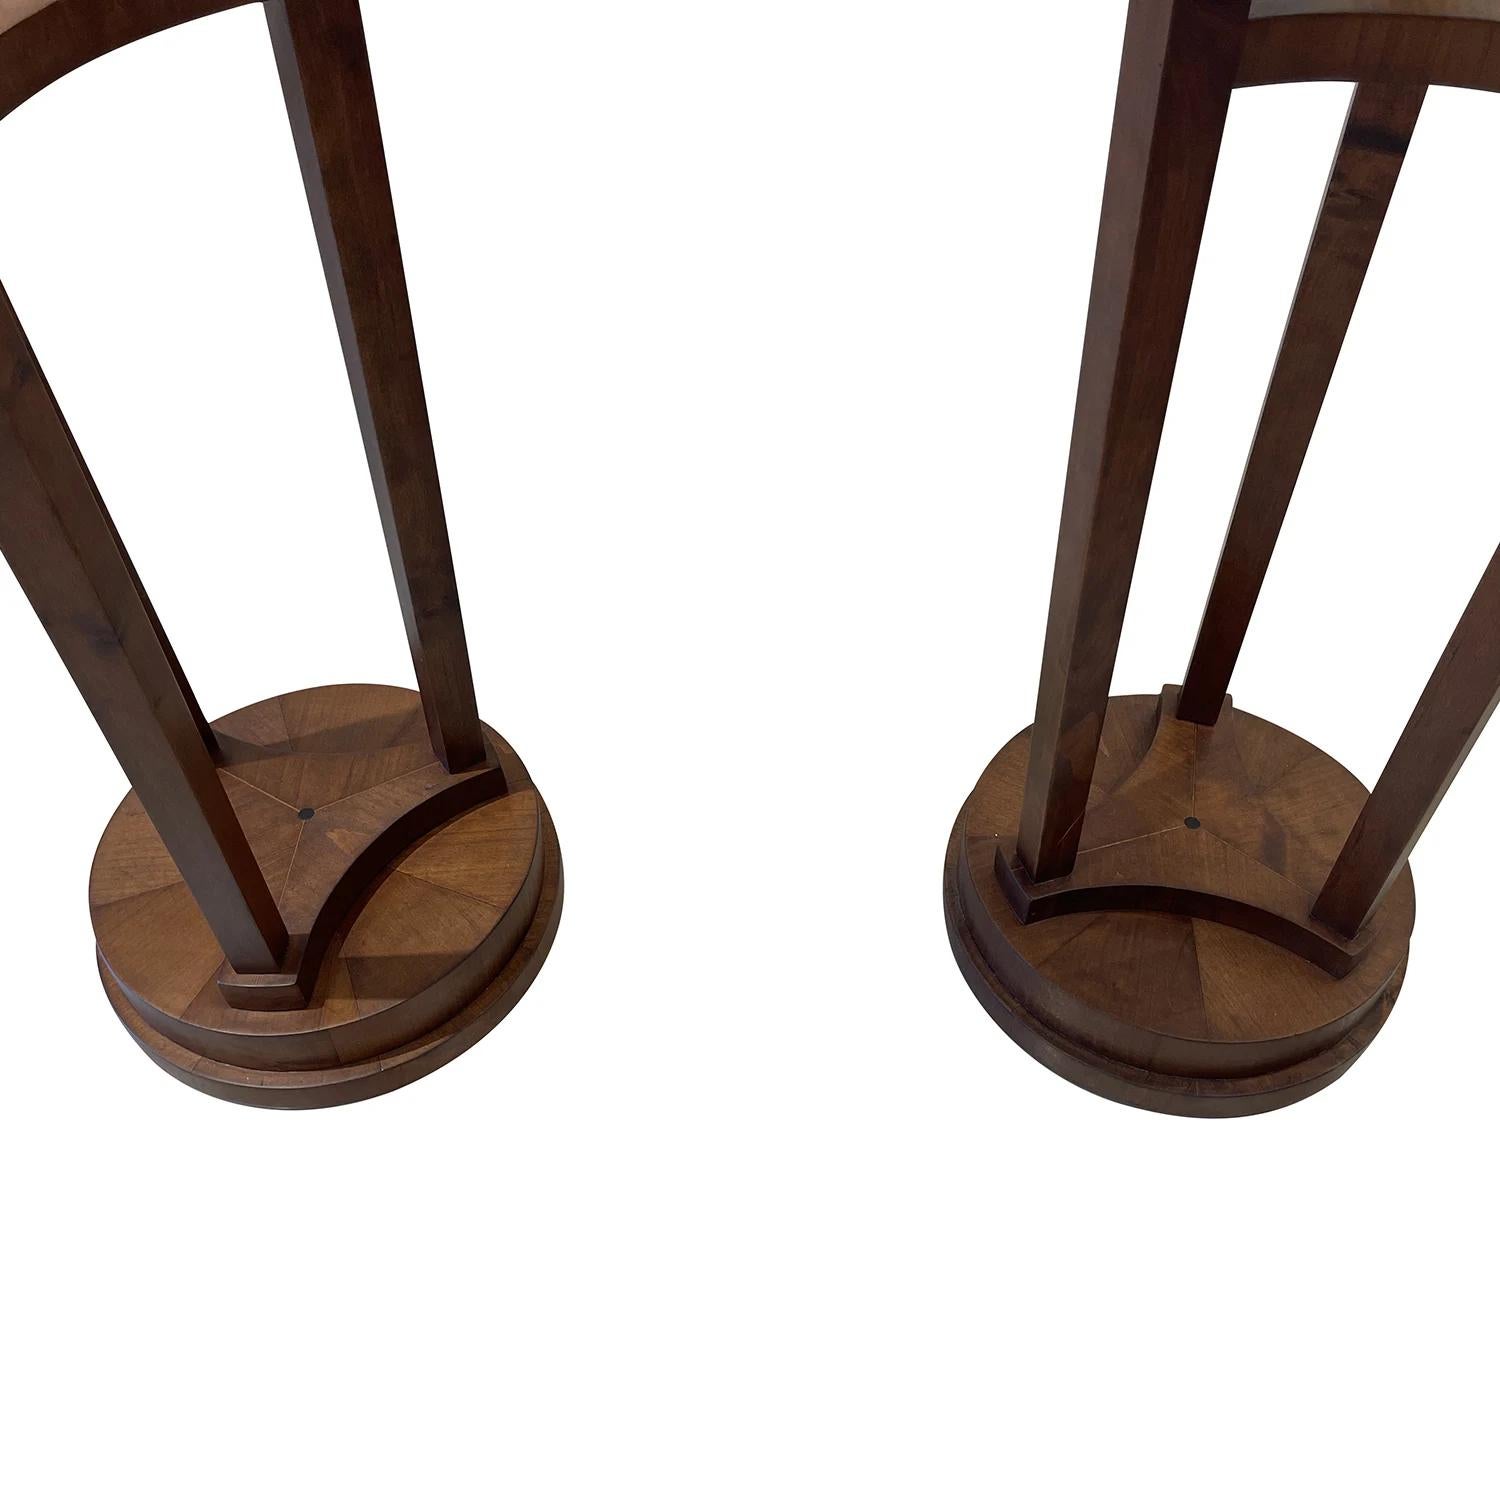 19th Century French Empire Pair of Antique Polished Mahogany Pedestals For Sale 2